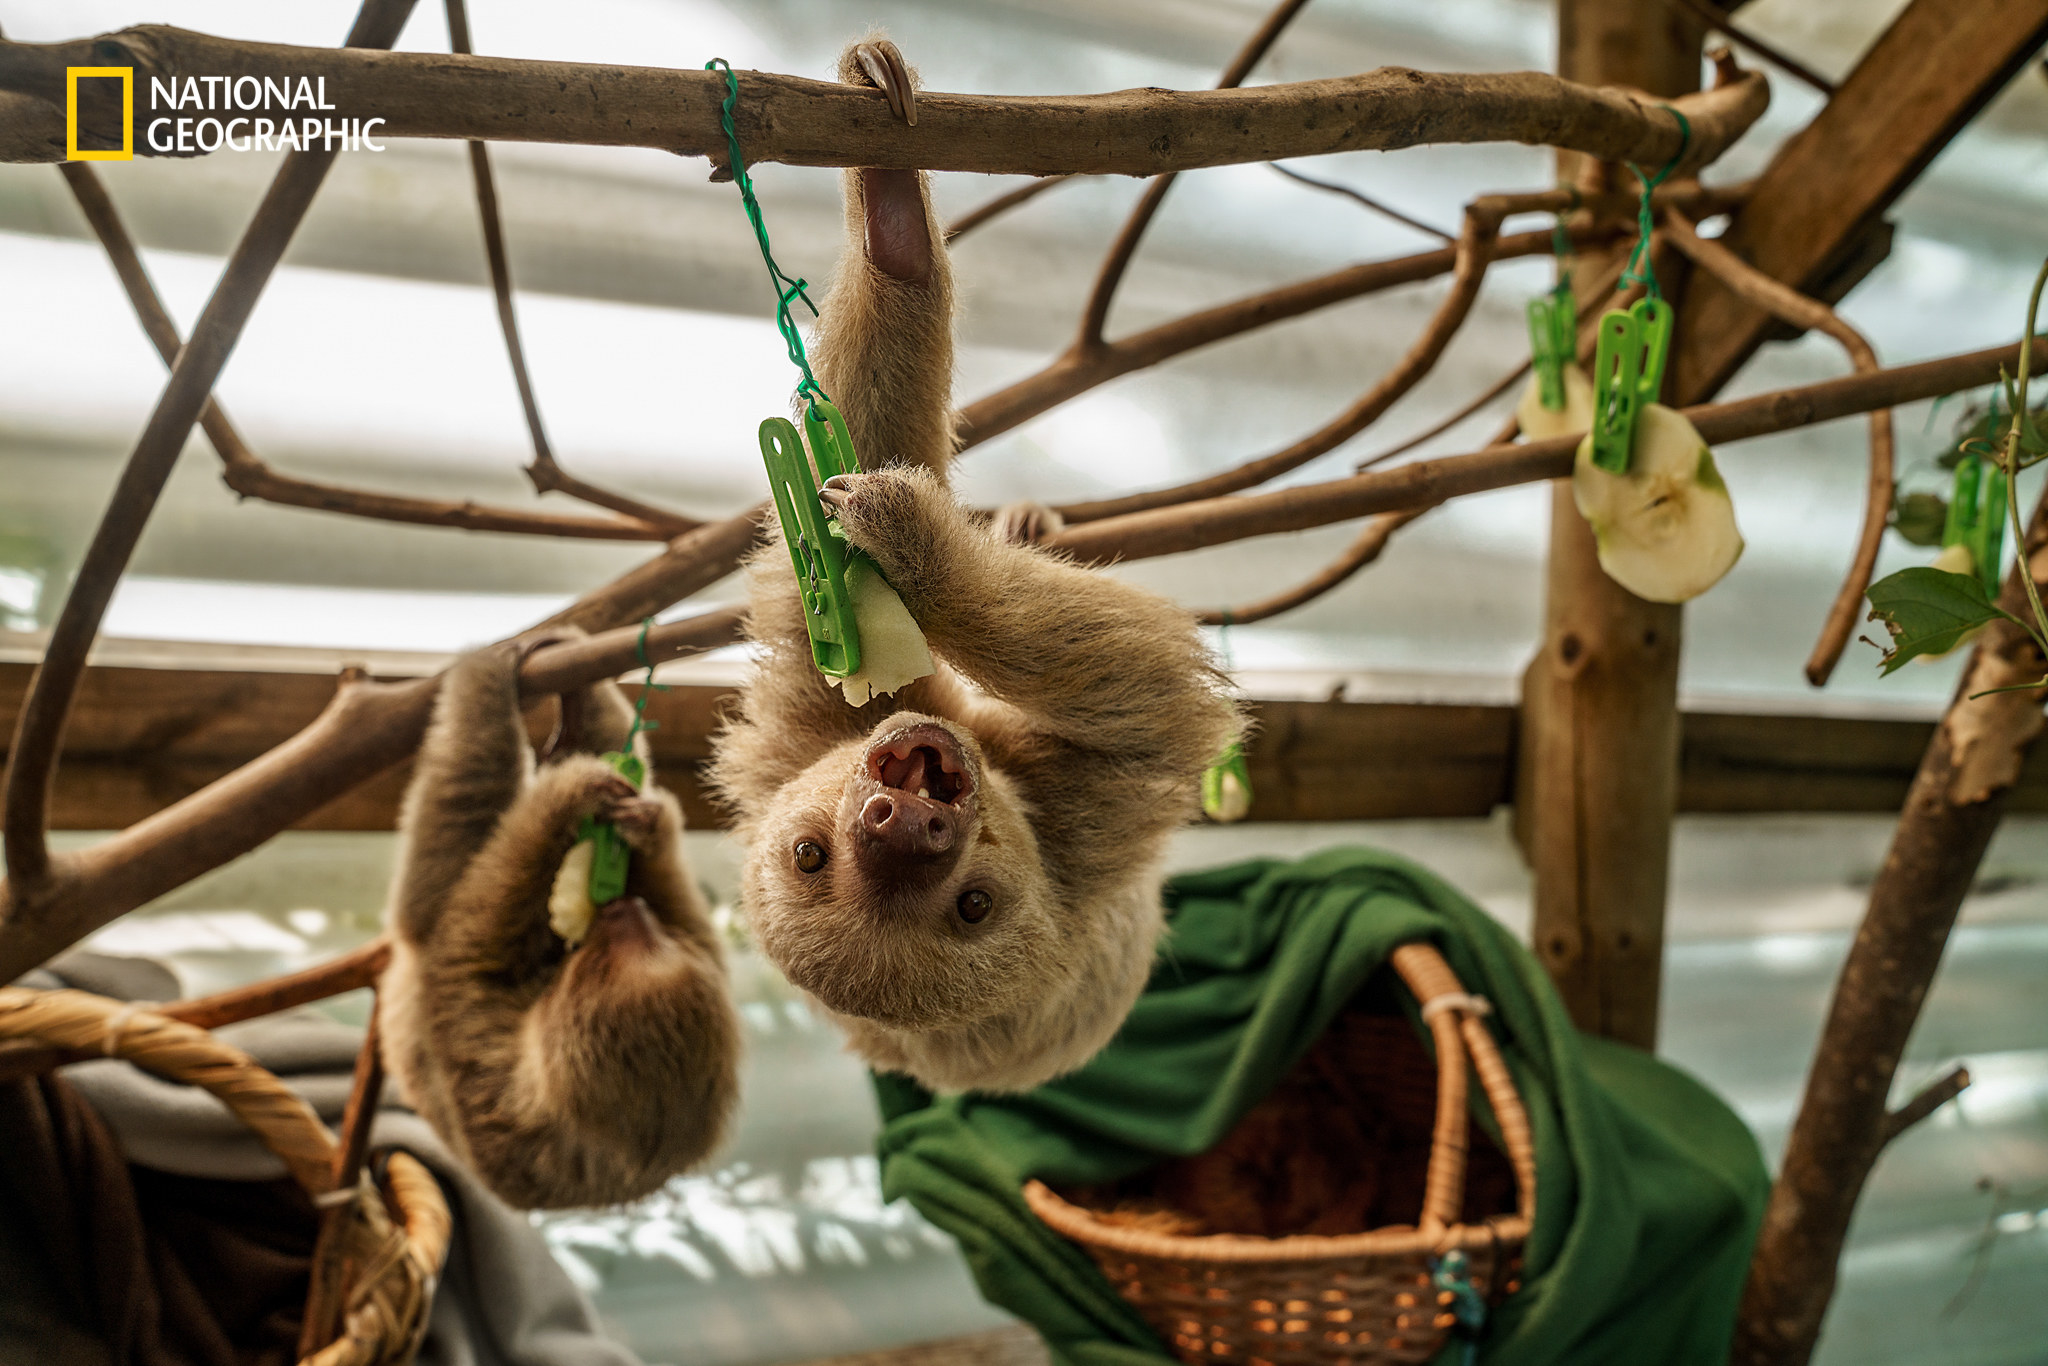 Two sloths seen hanging upside down eating apples from clips 